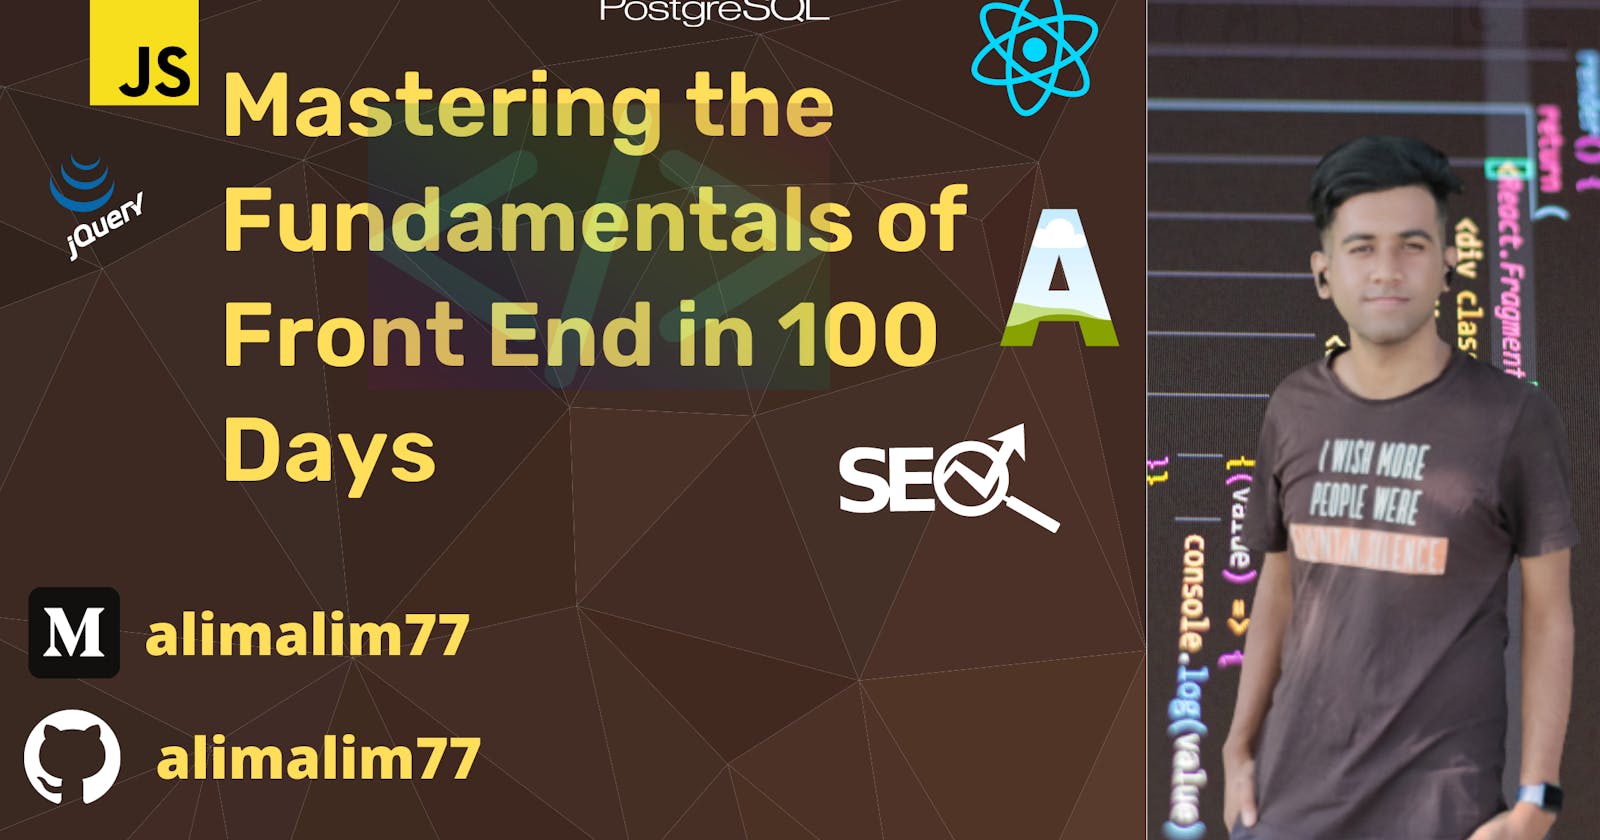 Mastering Front End Fundamentals in 100 Days